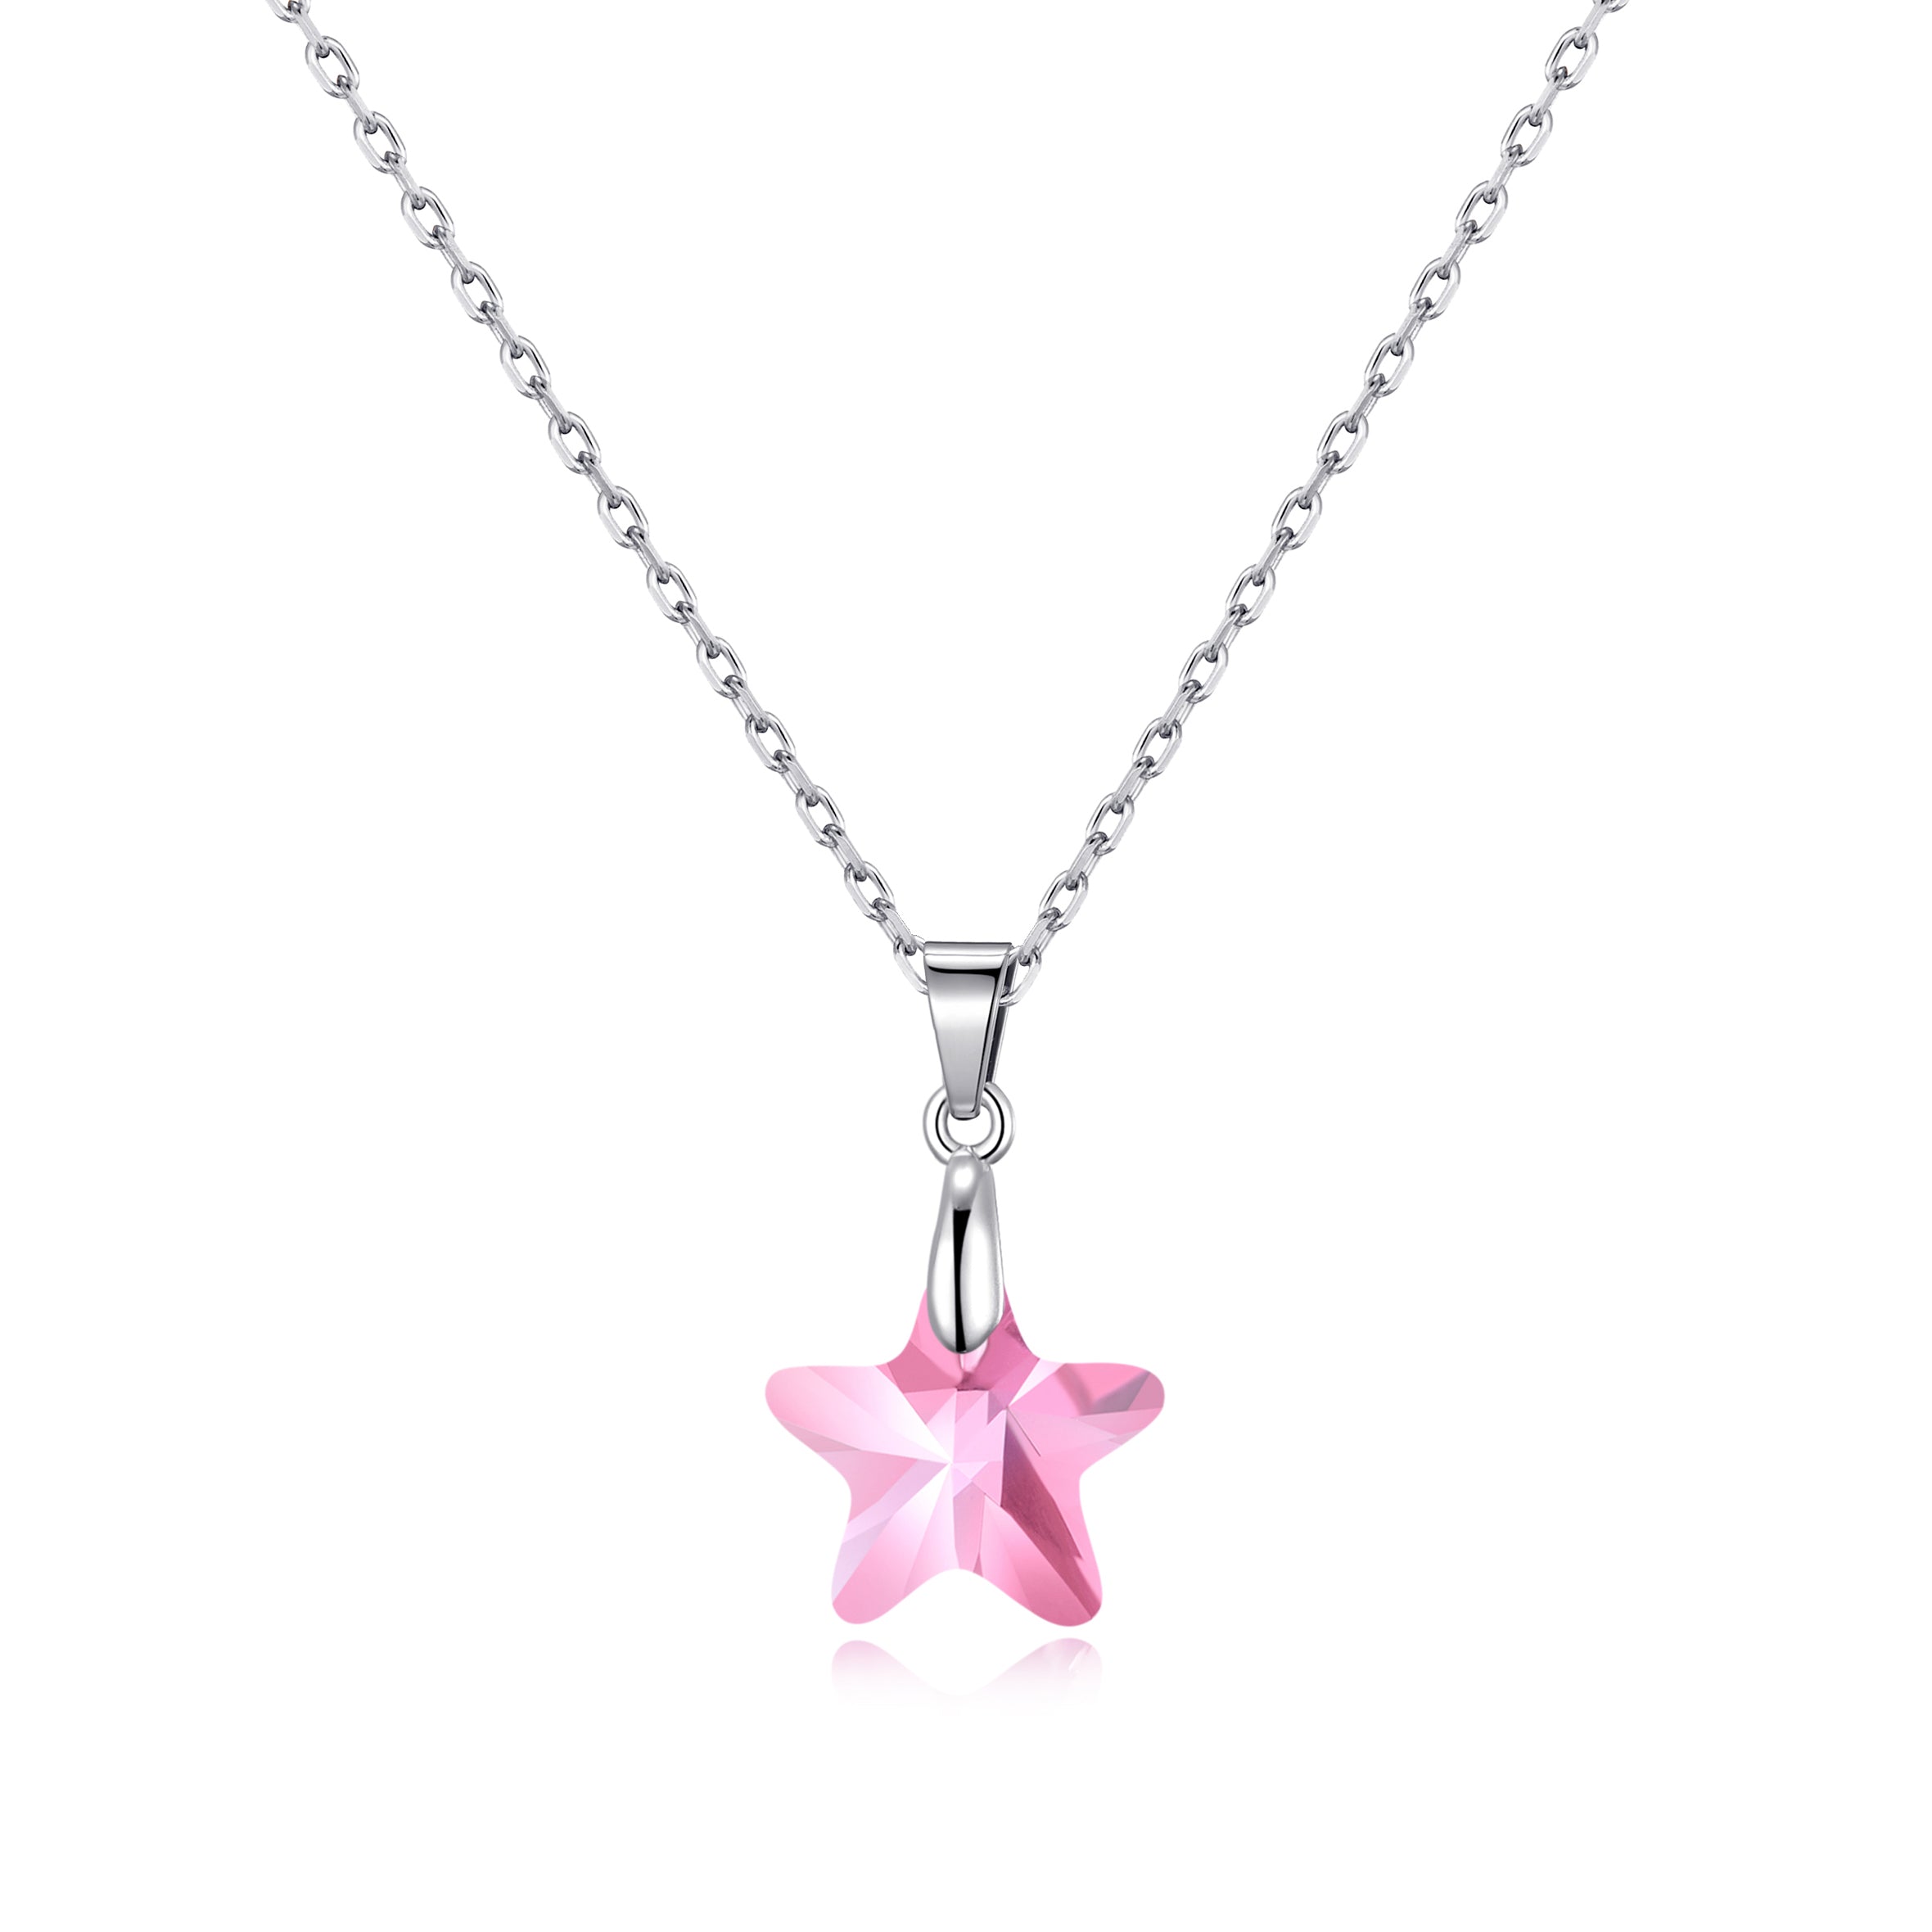 Sterling Silver Light Rose Star Necklace Created with Zircondia® Crystals by Philip Jones Jewellery